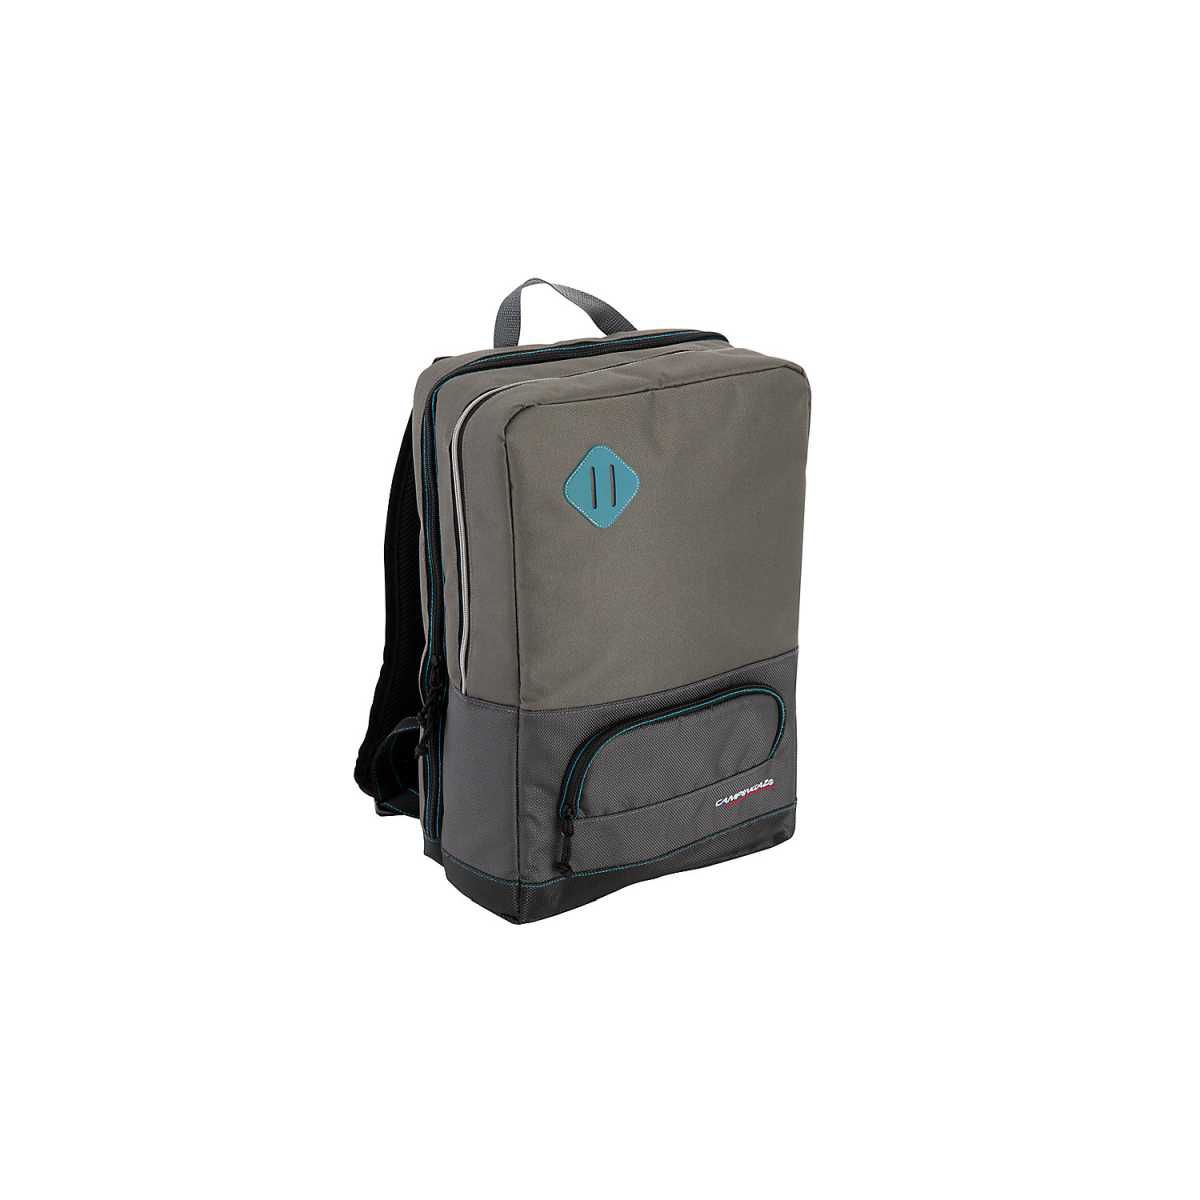 CAMPINGAZ Kuehltasche The Office - Backpack 16L - 2000036877